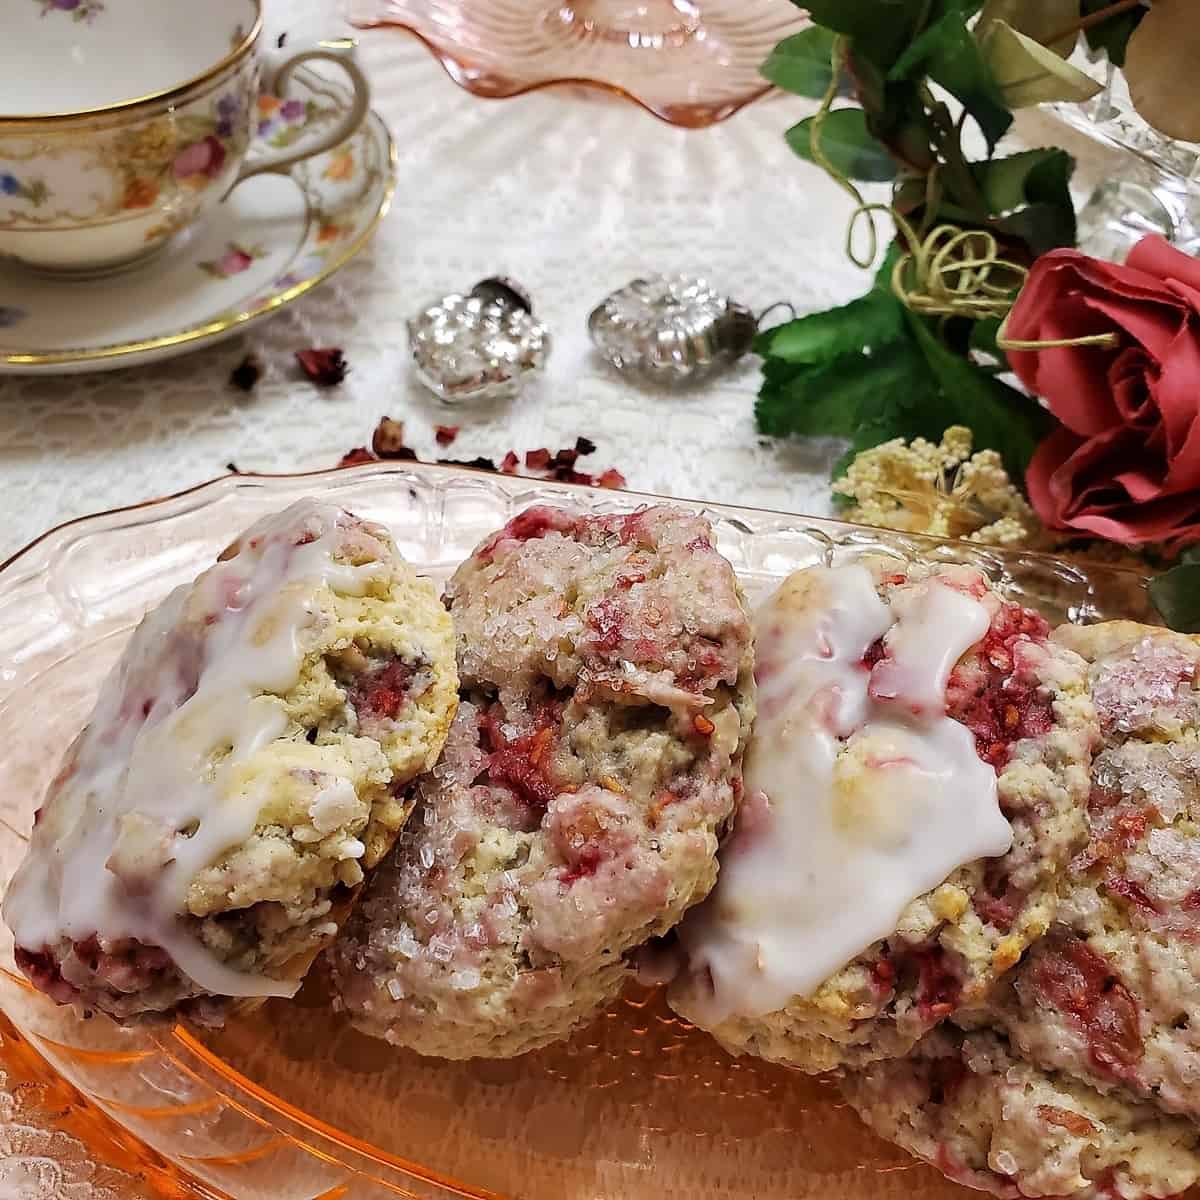 Serving Raspberry Scones for an Afternoon Tea Party - Low Tea